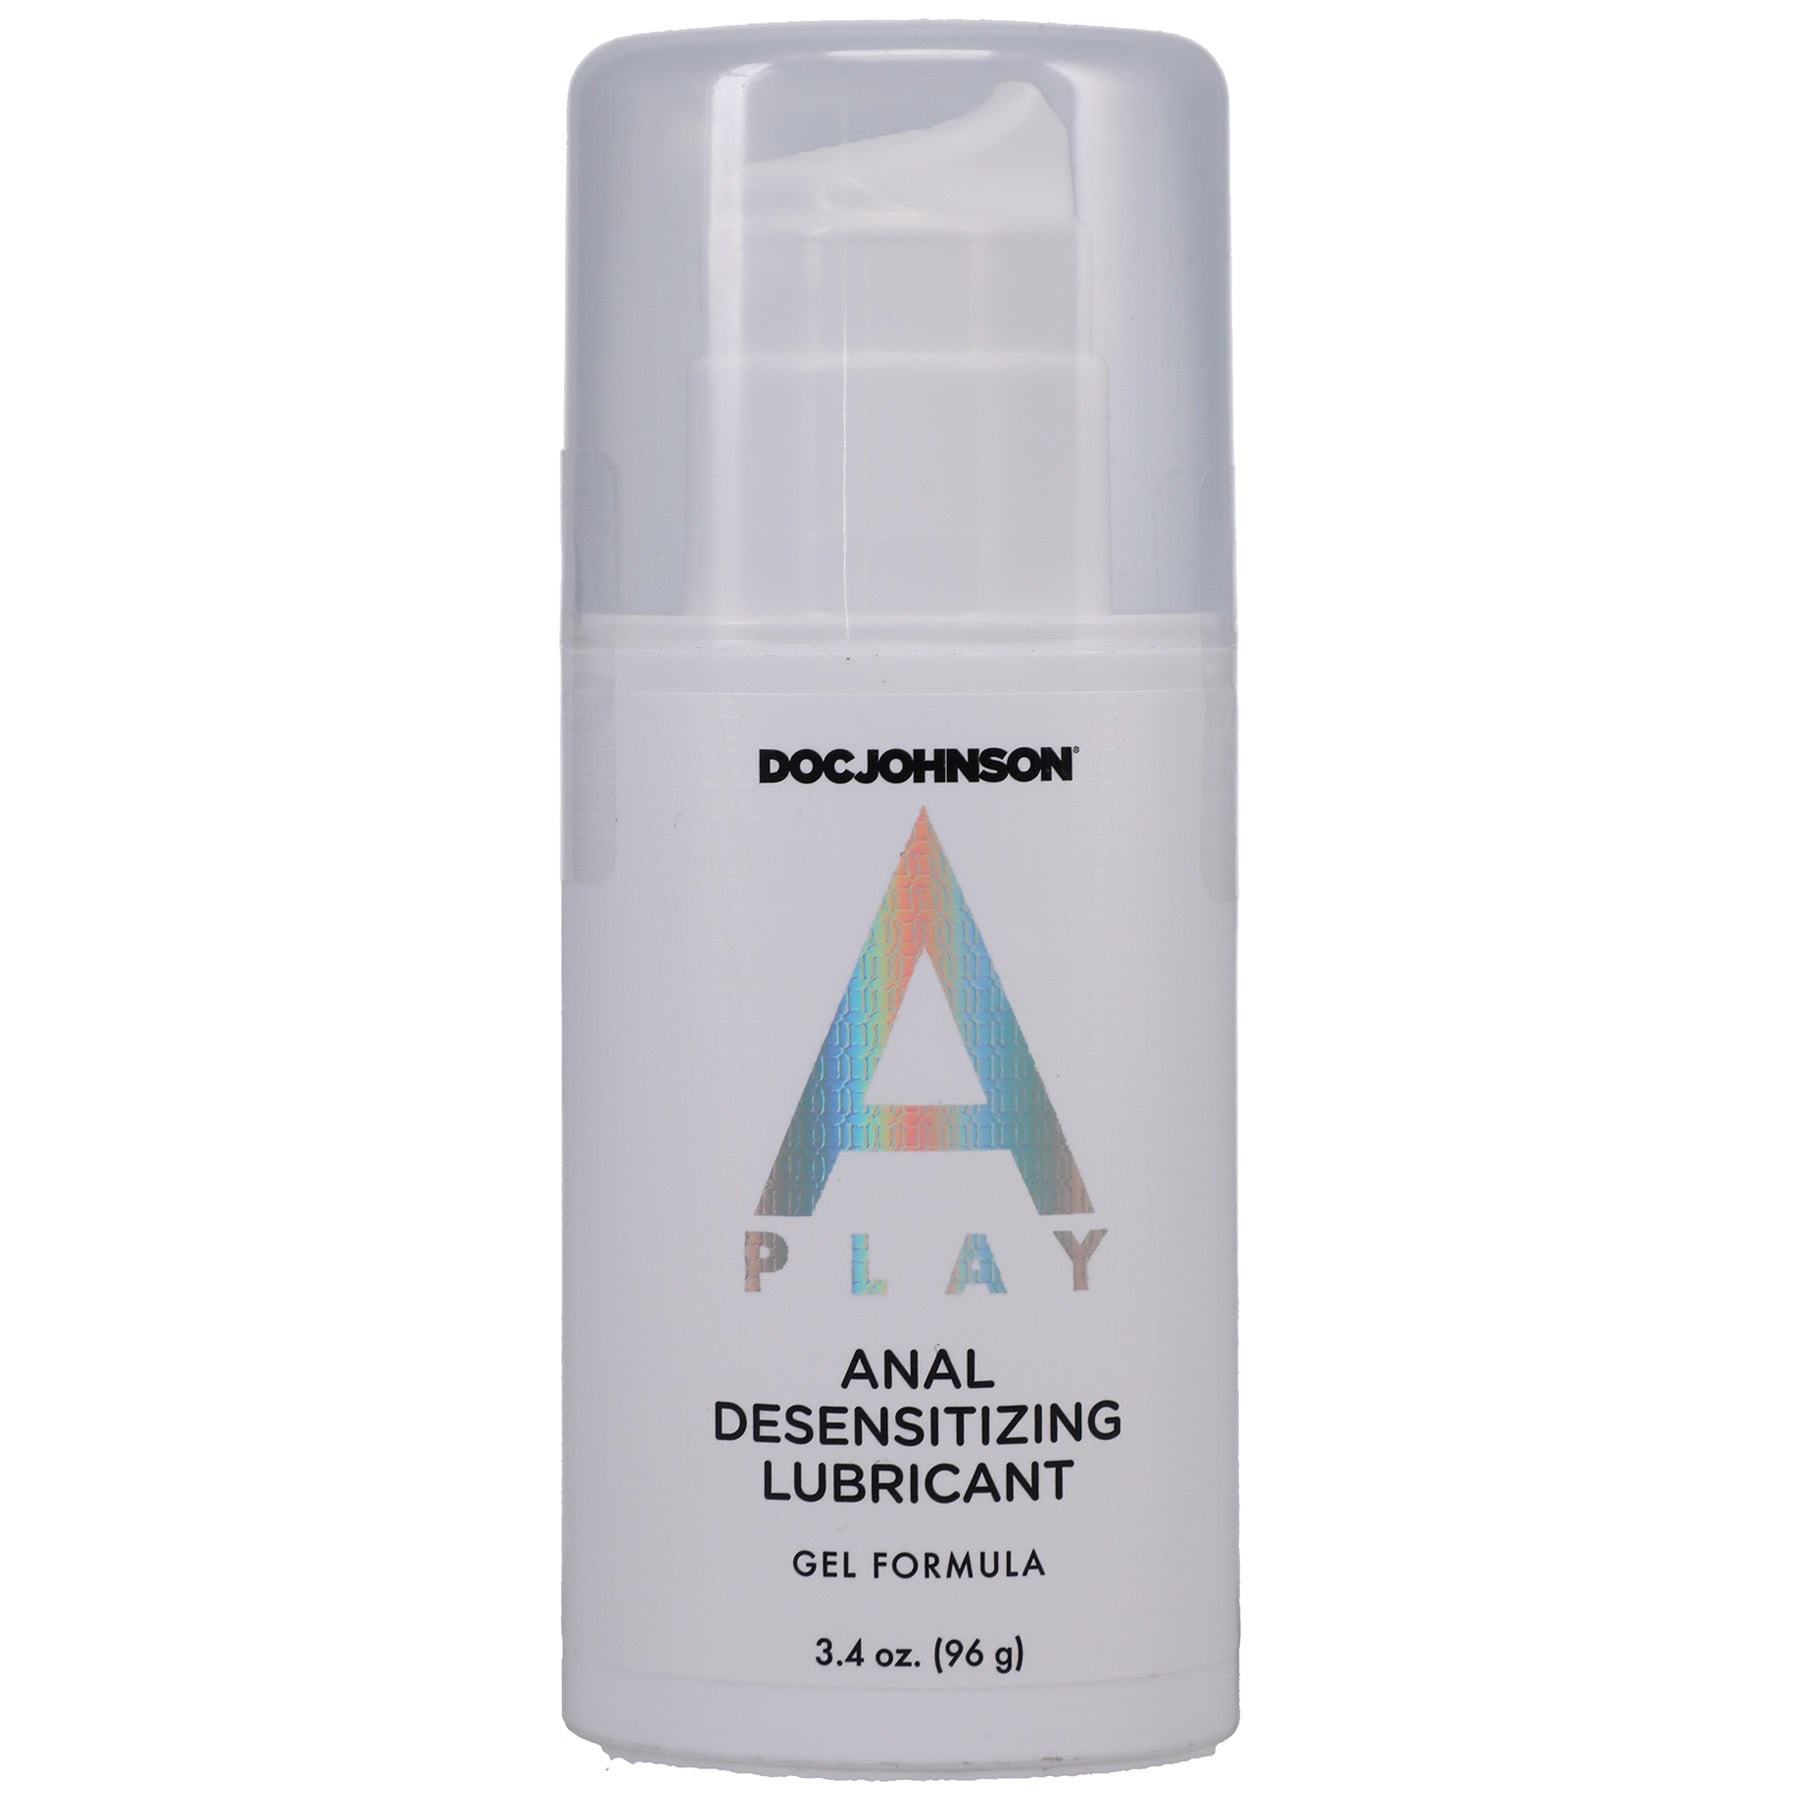 Doc Johnson A-Play Anal Desensitizing Lubricant Gel Formula 3.4 oz. - Extreme Toyz Singapore - https://extremetoyz.com.sg - Sex Toys and Lingerie Online Store - Bondage Gear / Vibrators / Electrosex Toys / Wireless Remote Control Vibes / Sexy Lingerie and Role Play / BDSM / Dungeon Furnitures / Dildos and Strap Ons &nbsp;/ Anal and Prostate Massagers / Anal Douche and Cleaning Aide / Delay Sprays and Gels / Lubricants and more...